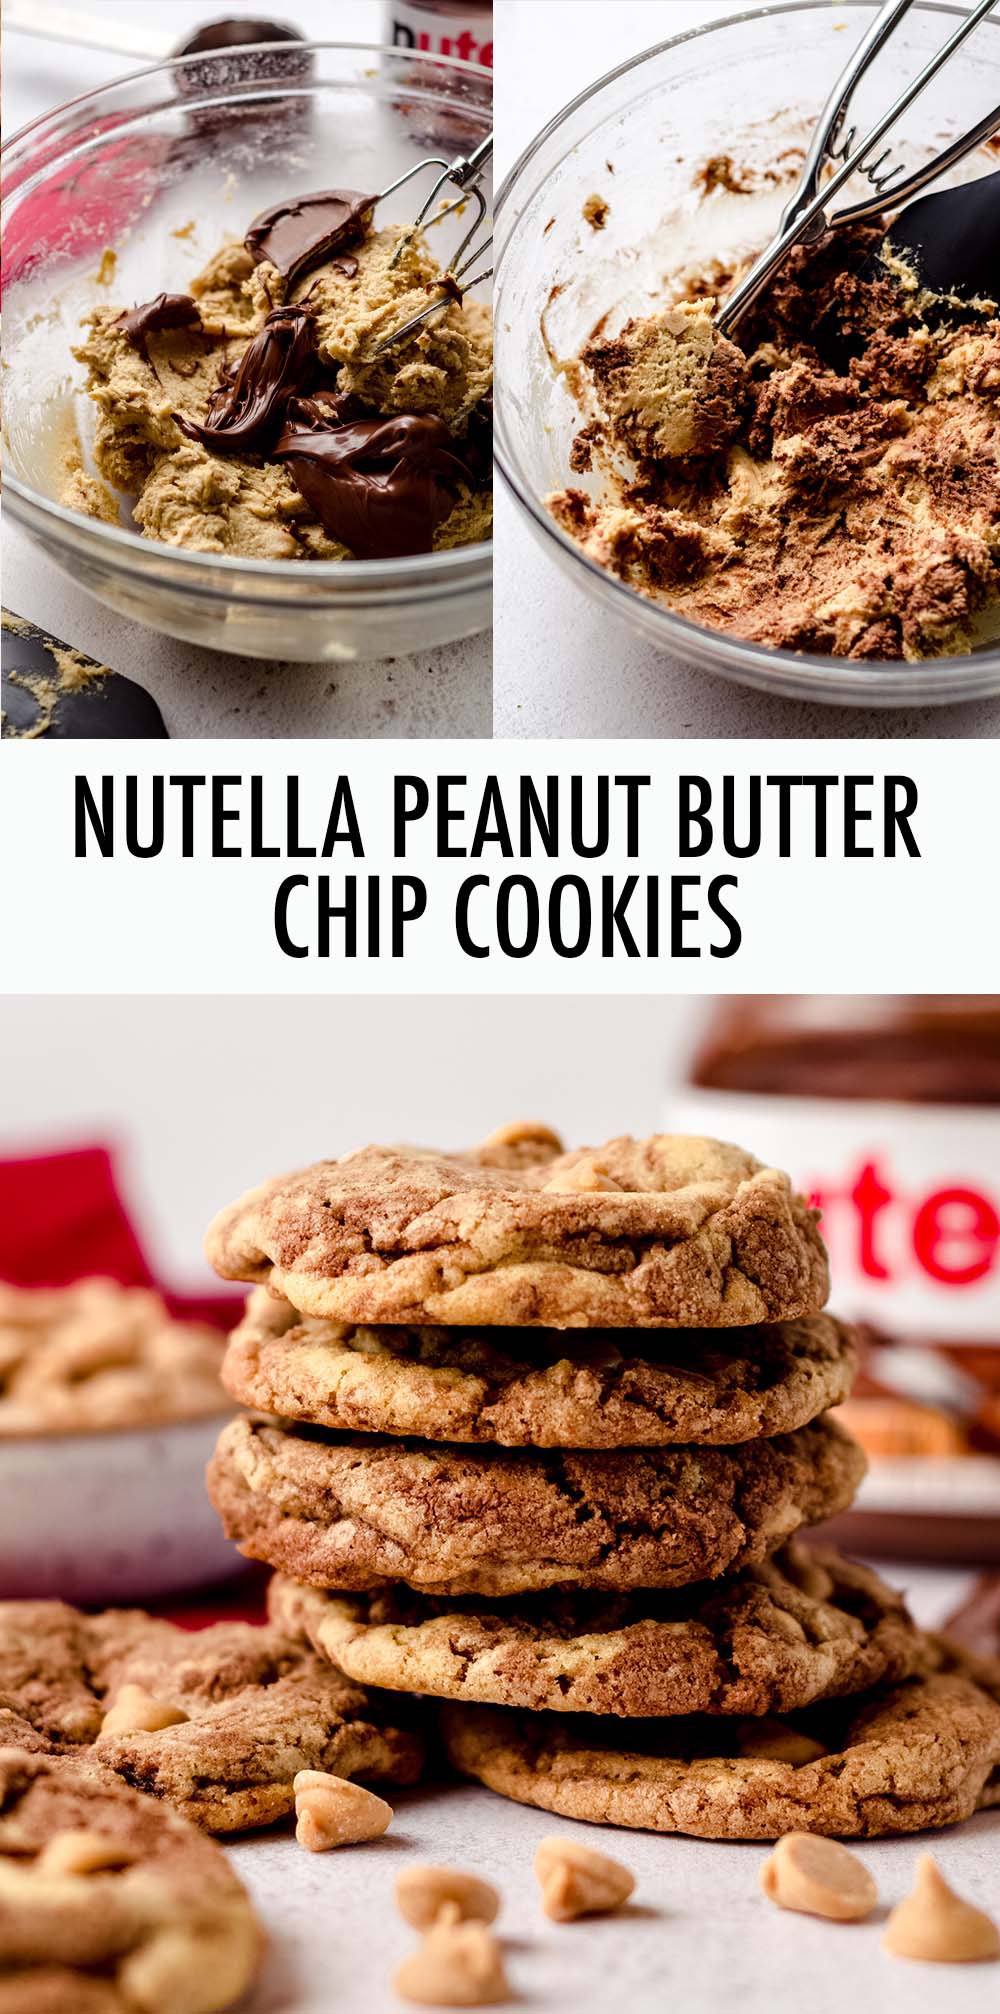 This no chill cookie gets swirled with Nutella and dotted with creamy peanut butter chips for a chocolate and peanut butter combo you'll adore! via @frshaprilflours